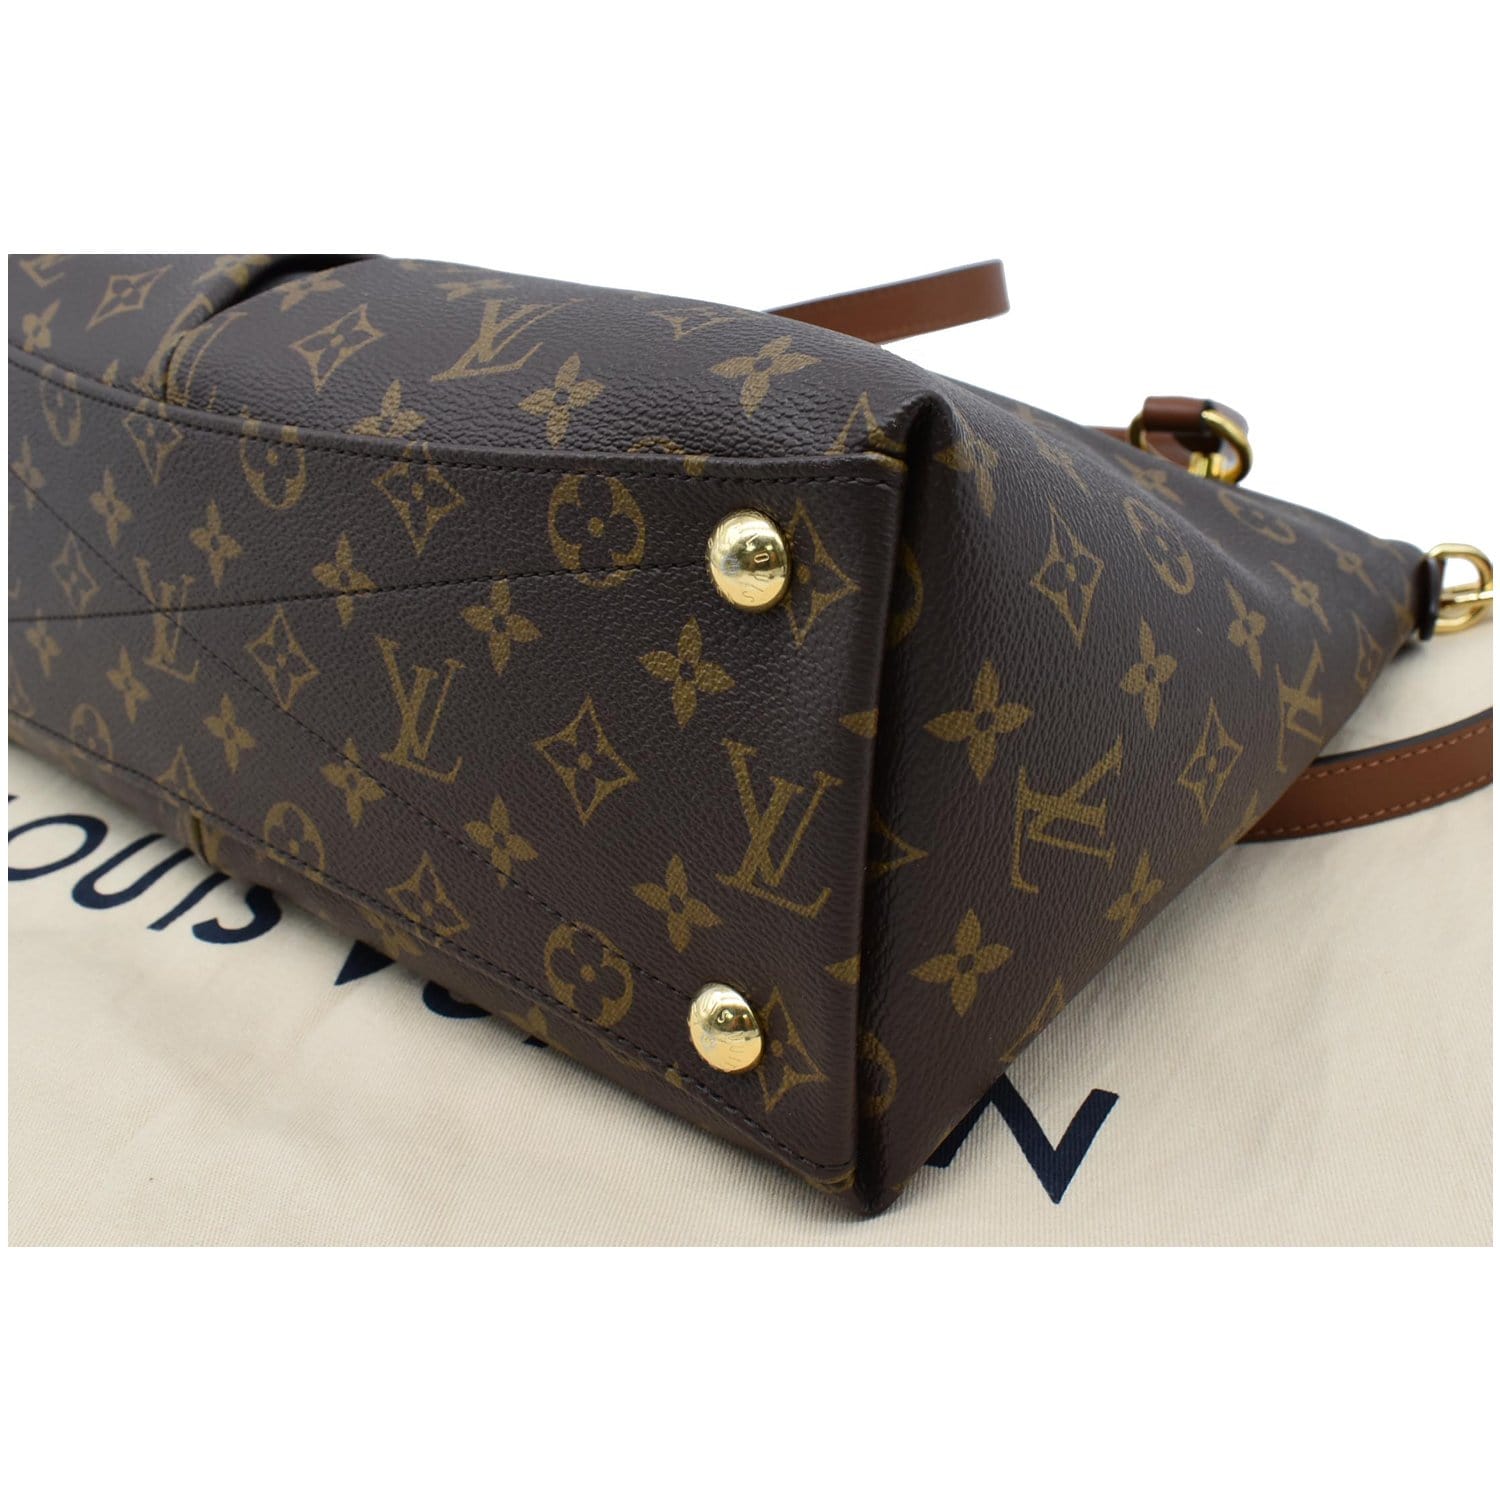 Louis Vuitton: Black Canvas Bags now up to −40%